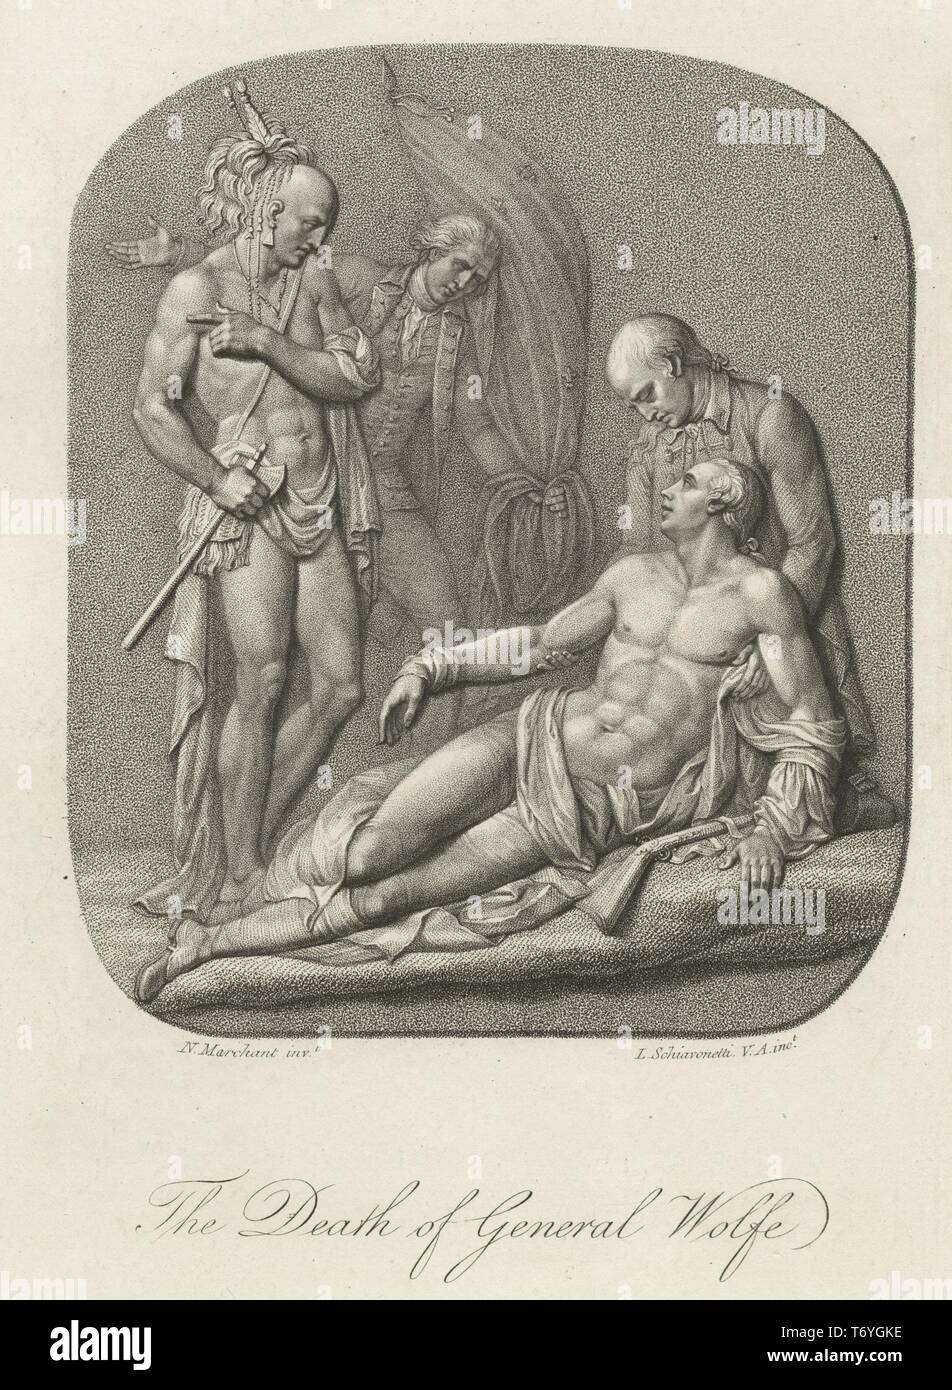 Engraving of the death of British General James Wolfe at the Battle of Quebec during the French and Indian War, 1759. From the New York Public Library. () Stock Photo